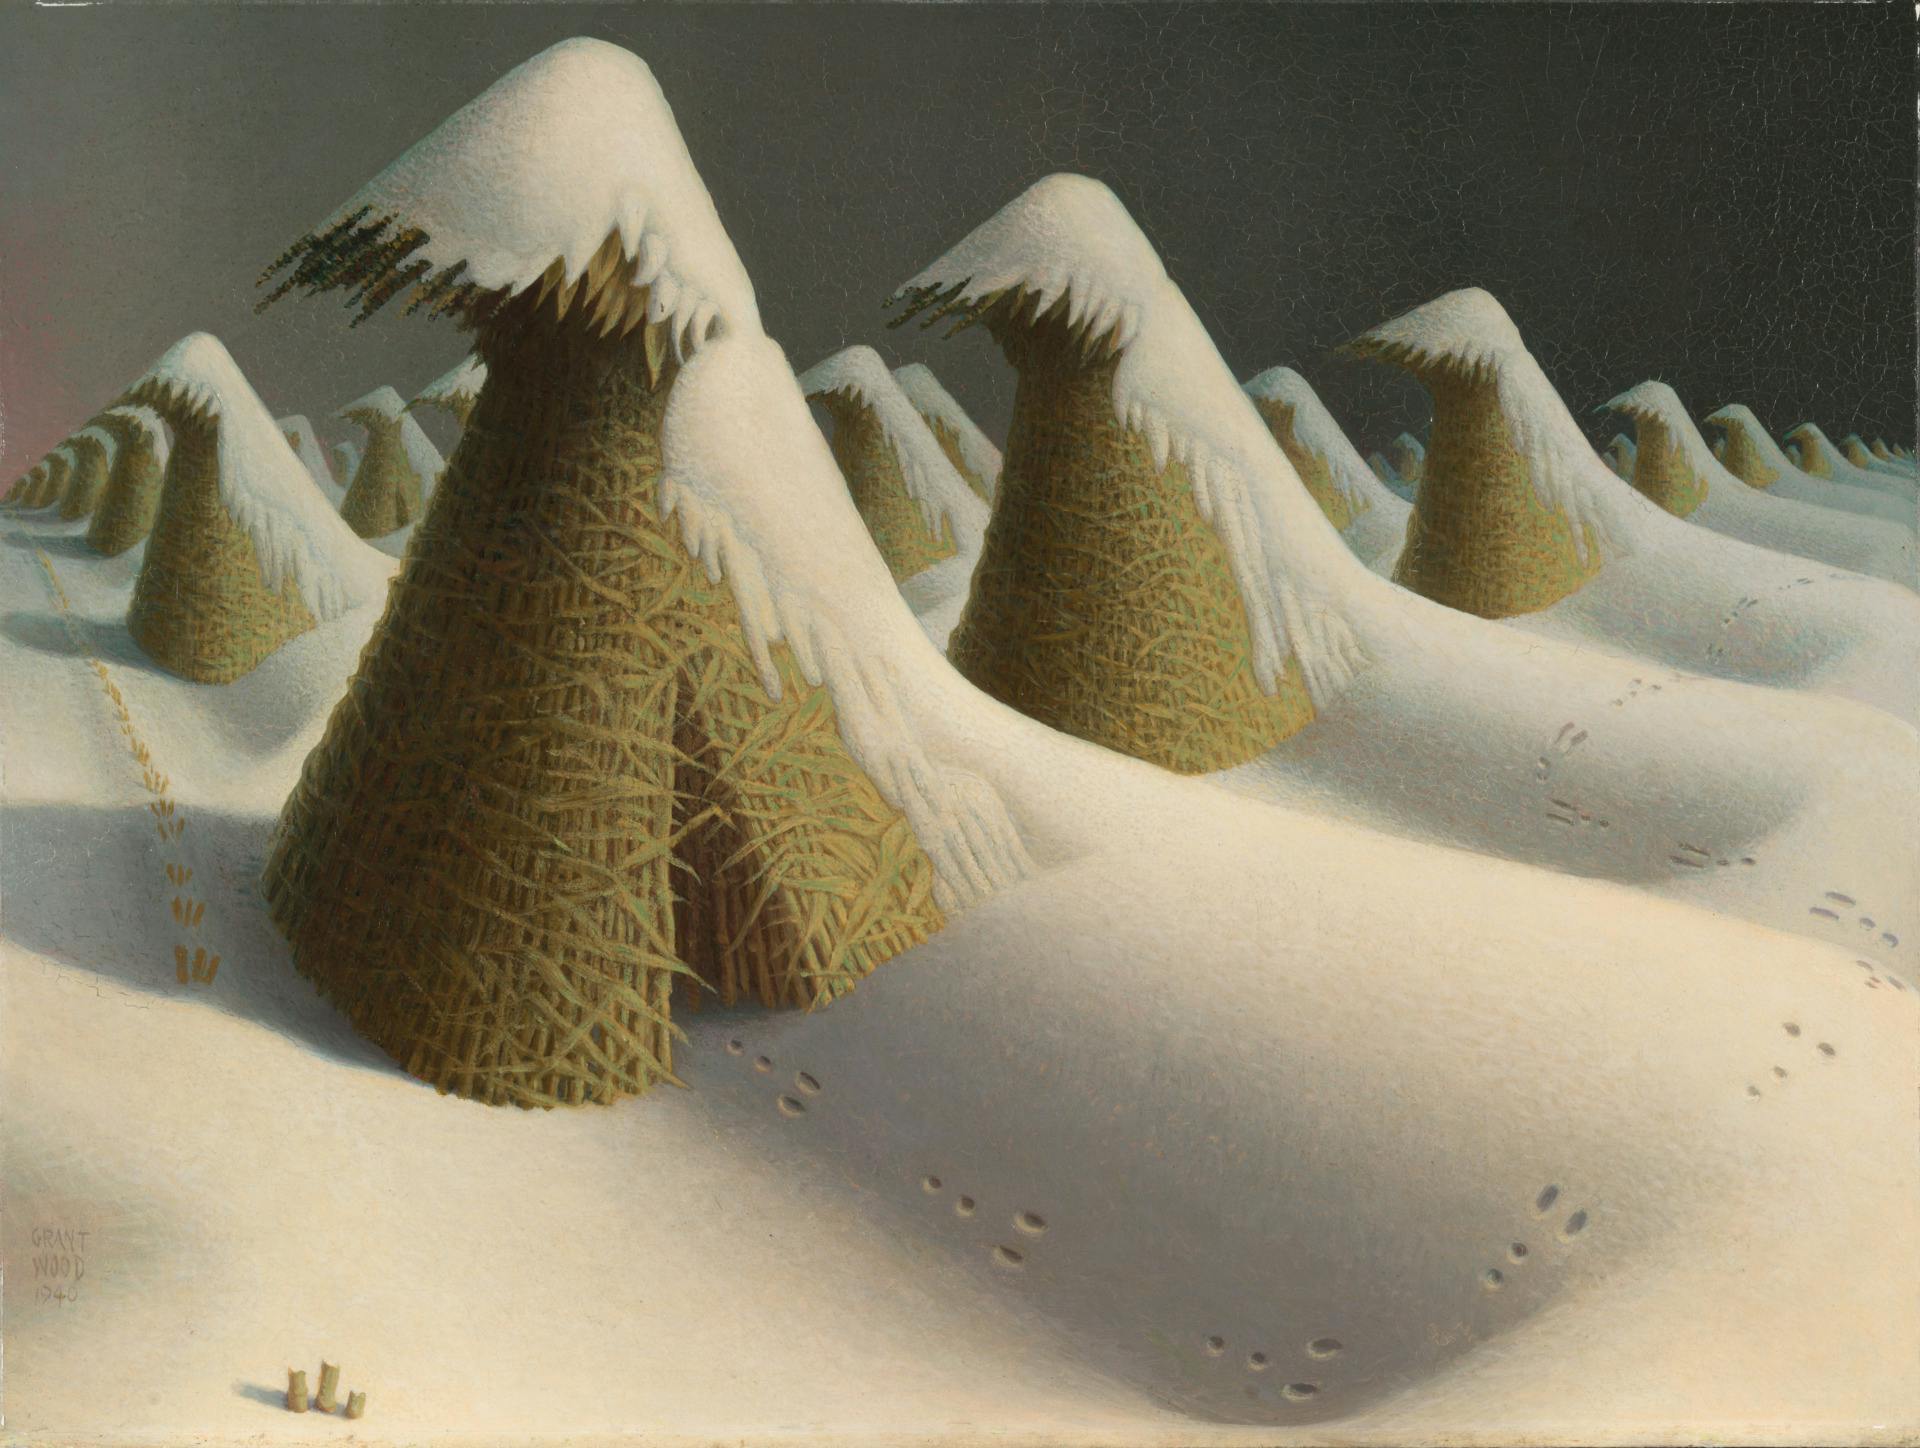 painting of a snowy field with several haystacks in a row